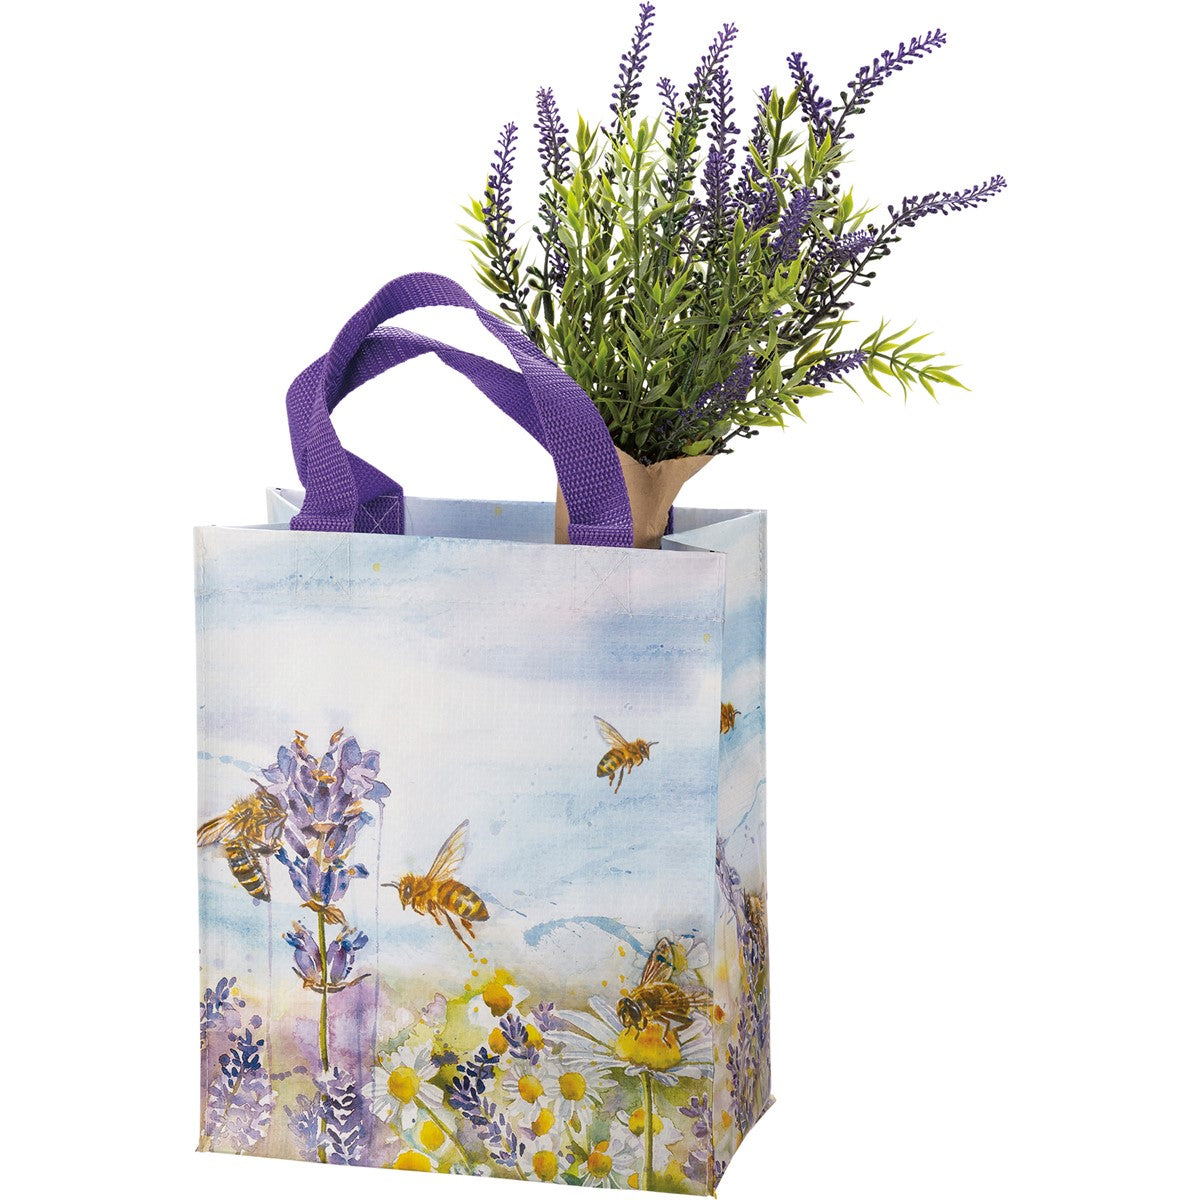 Lavender and Bees Daily Tote Market Bag